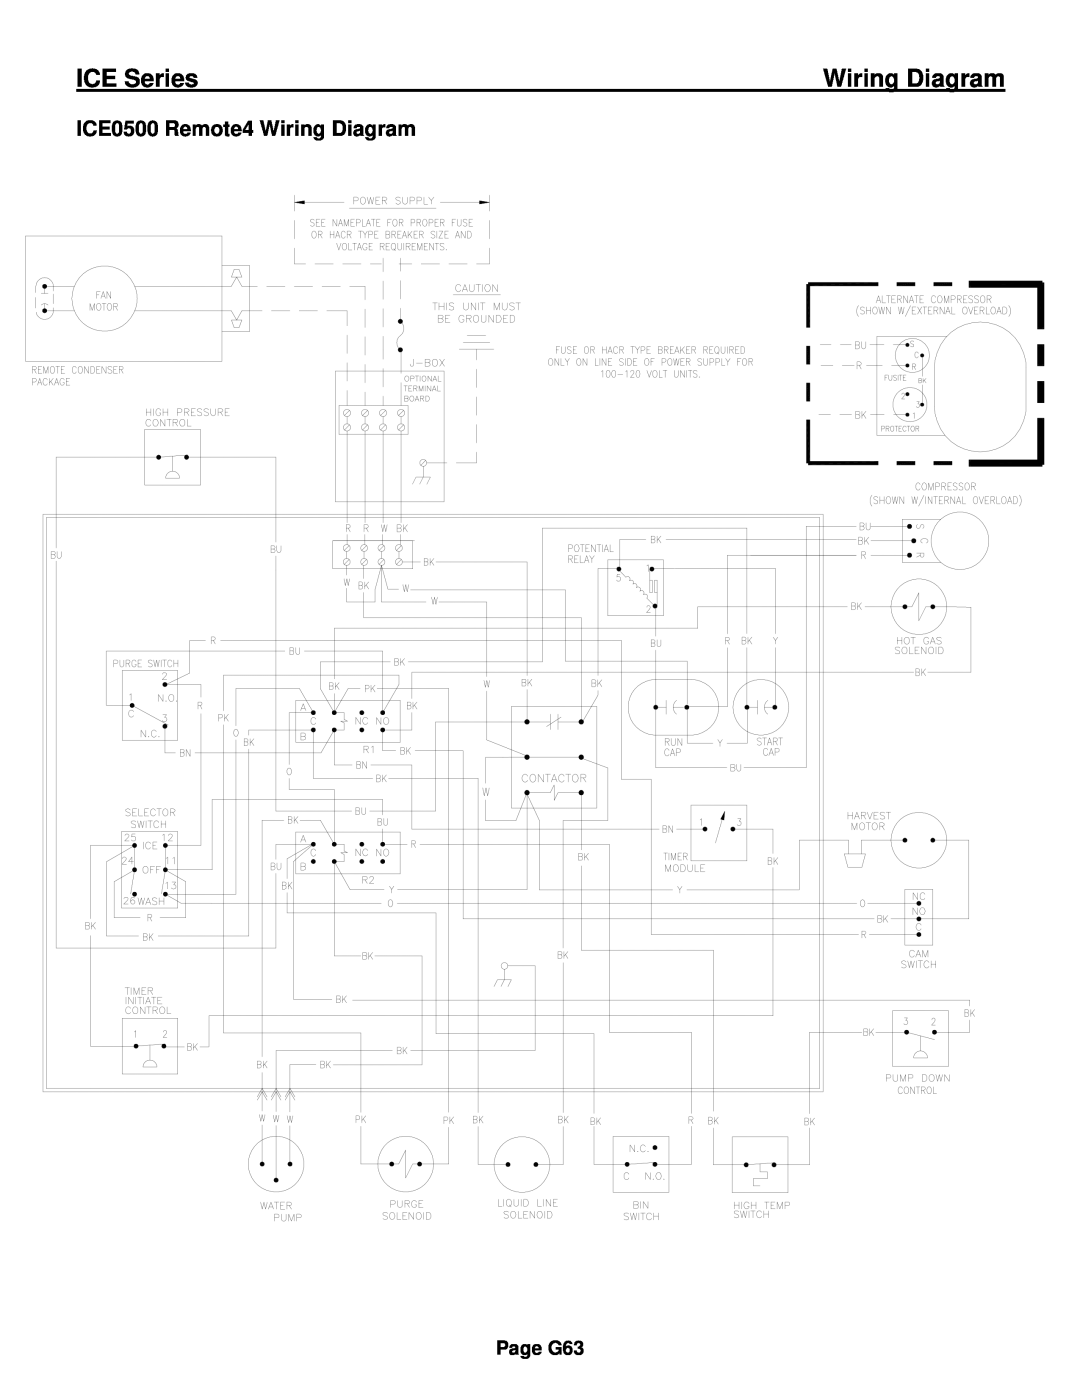 Ice-O-Matic ICE0250 Series installation manual ICE0500 Remote4 Wiring Diagram, ICE Series, Page G63 